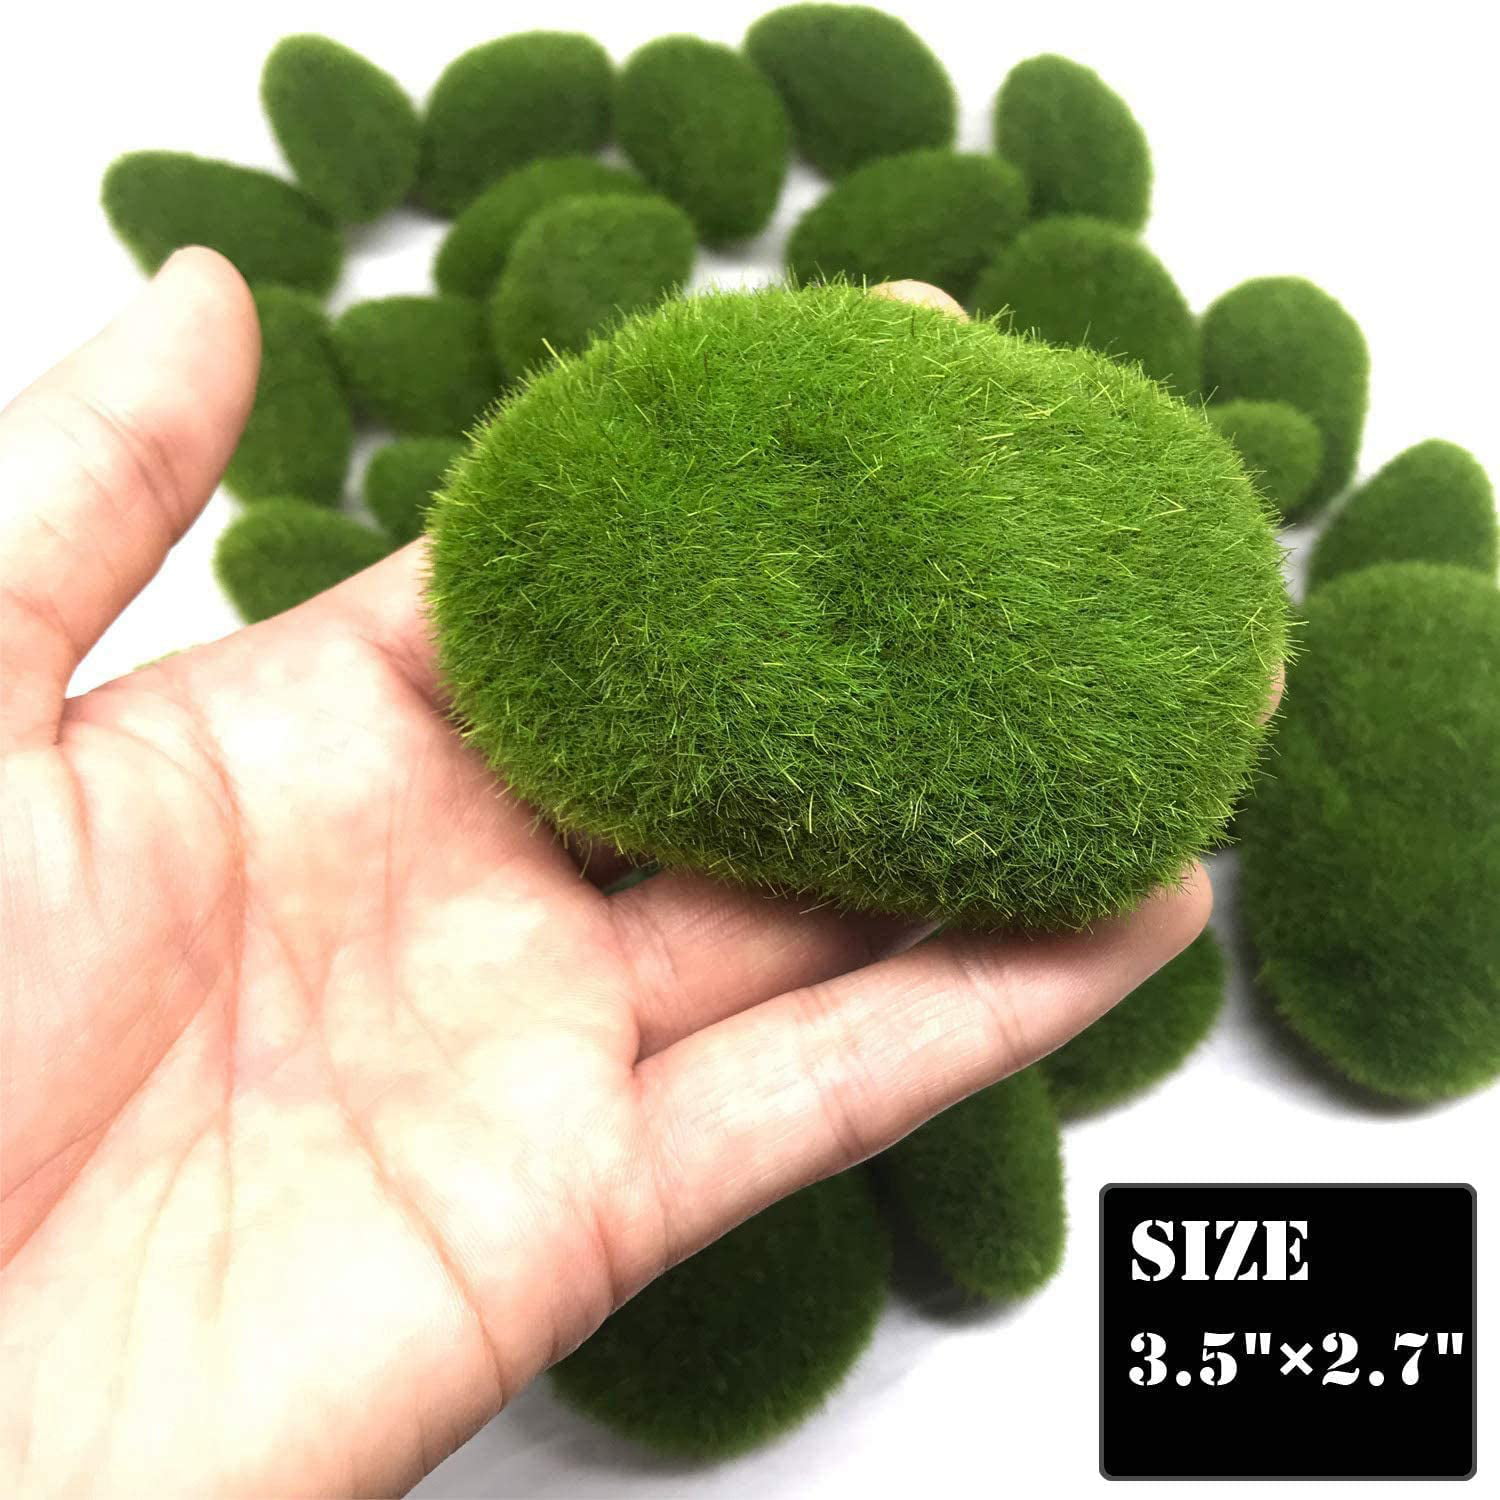 TIHOOD 30 PCS 3 Size Artificial Moss Rocks Decorative, Green Moss Balls,Moss  Stones, Green Moss Covered Stones, Fake Moss Decor for Floral Arrangements,  Fairy Gardens and Crafting